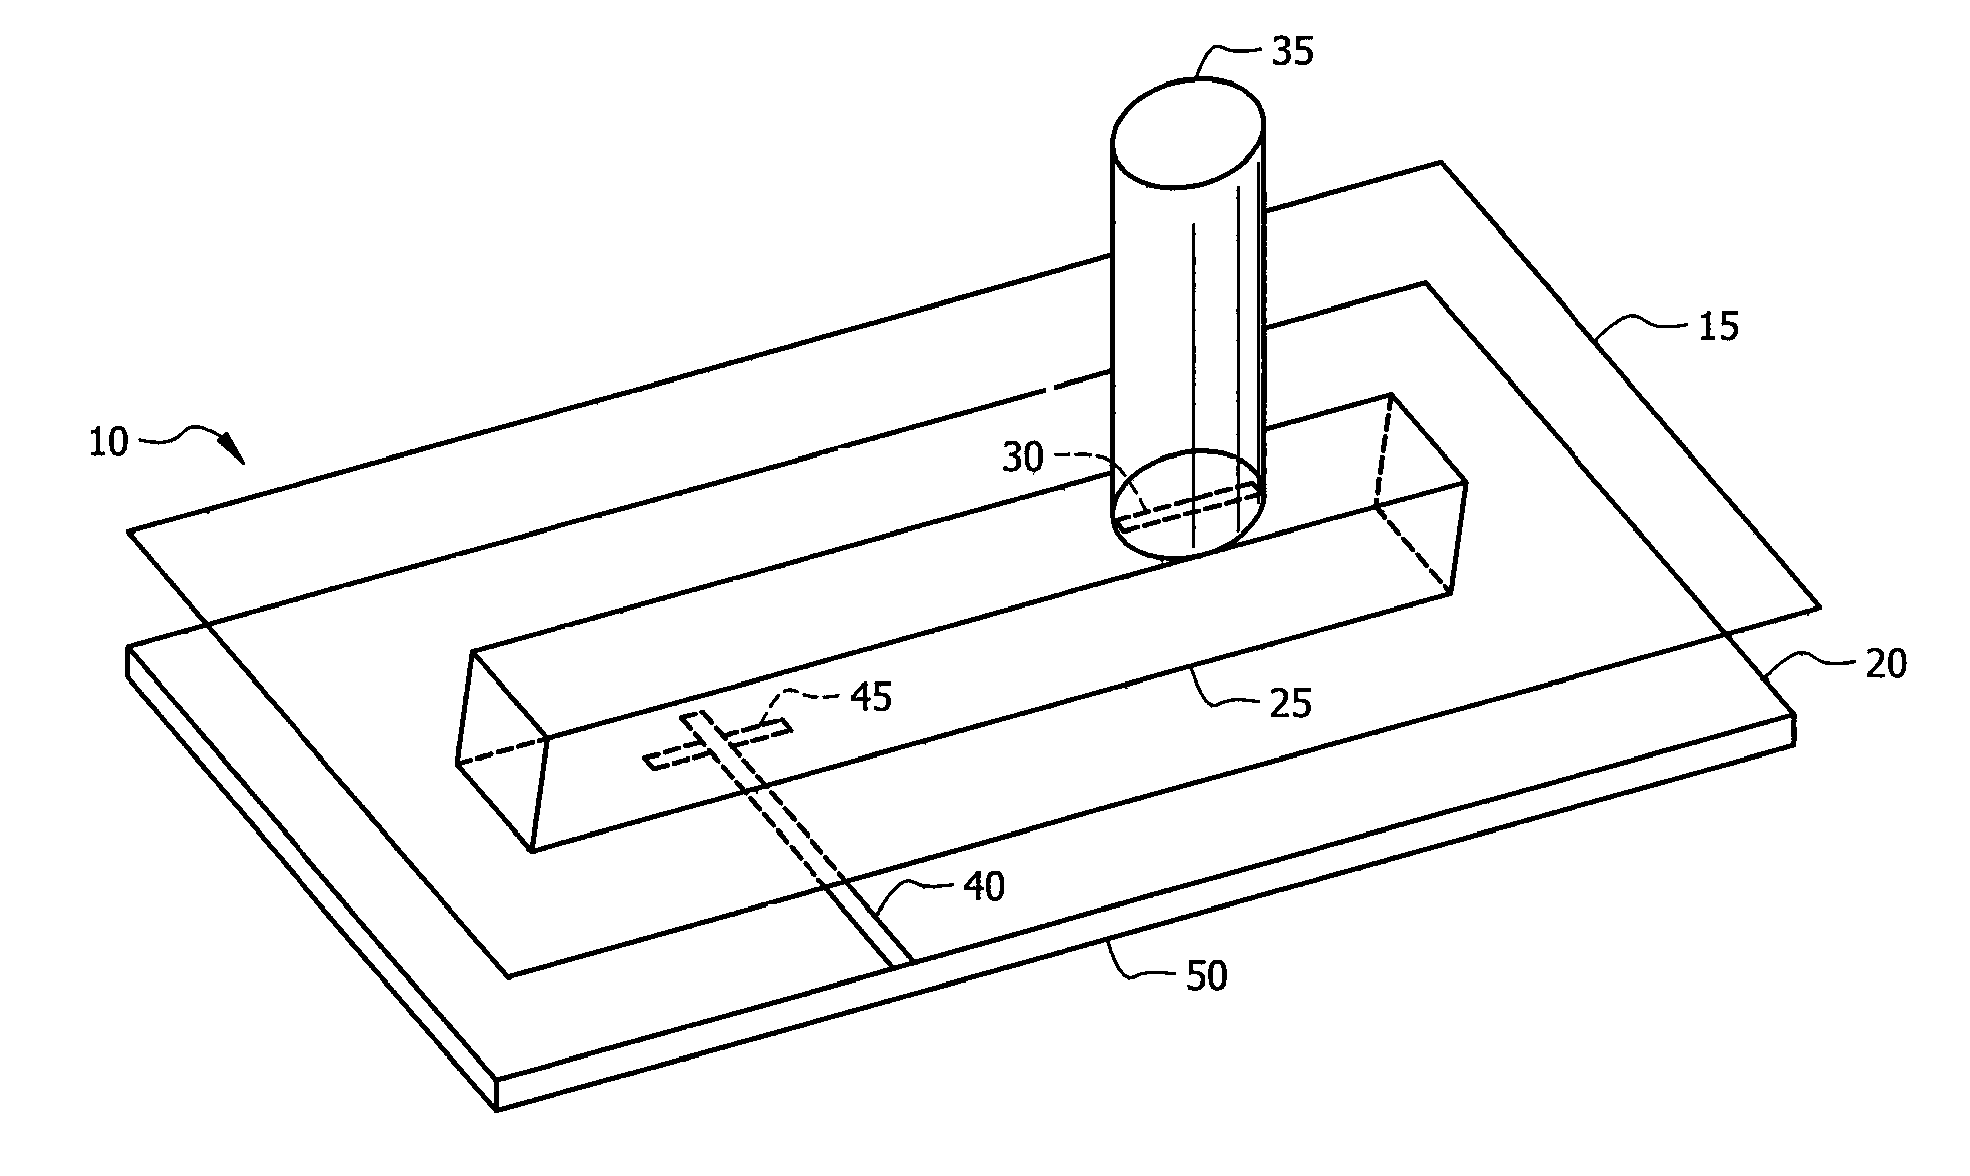 High-frequency feed structure antenna apparatus and method of use